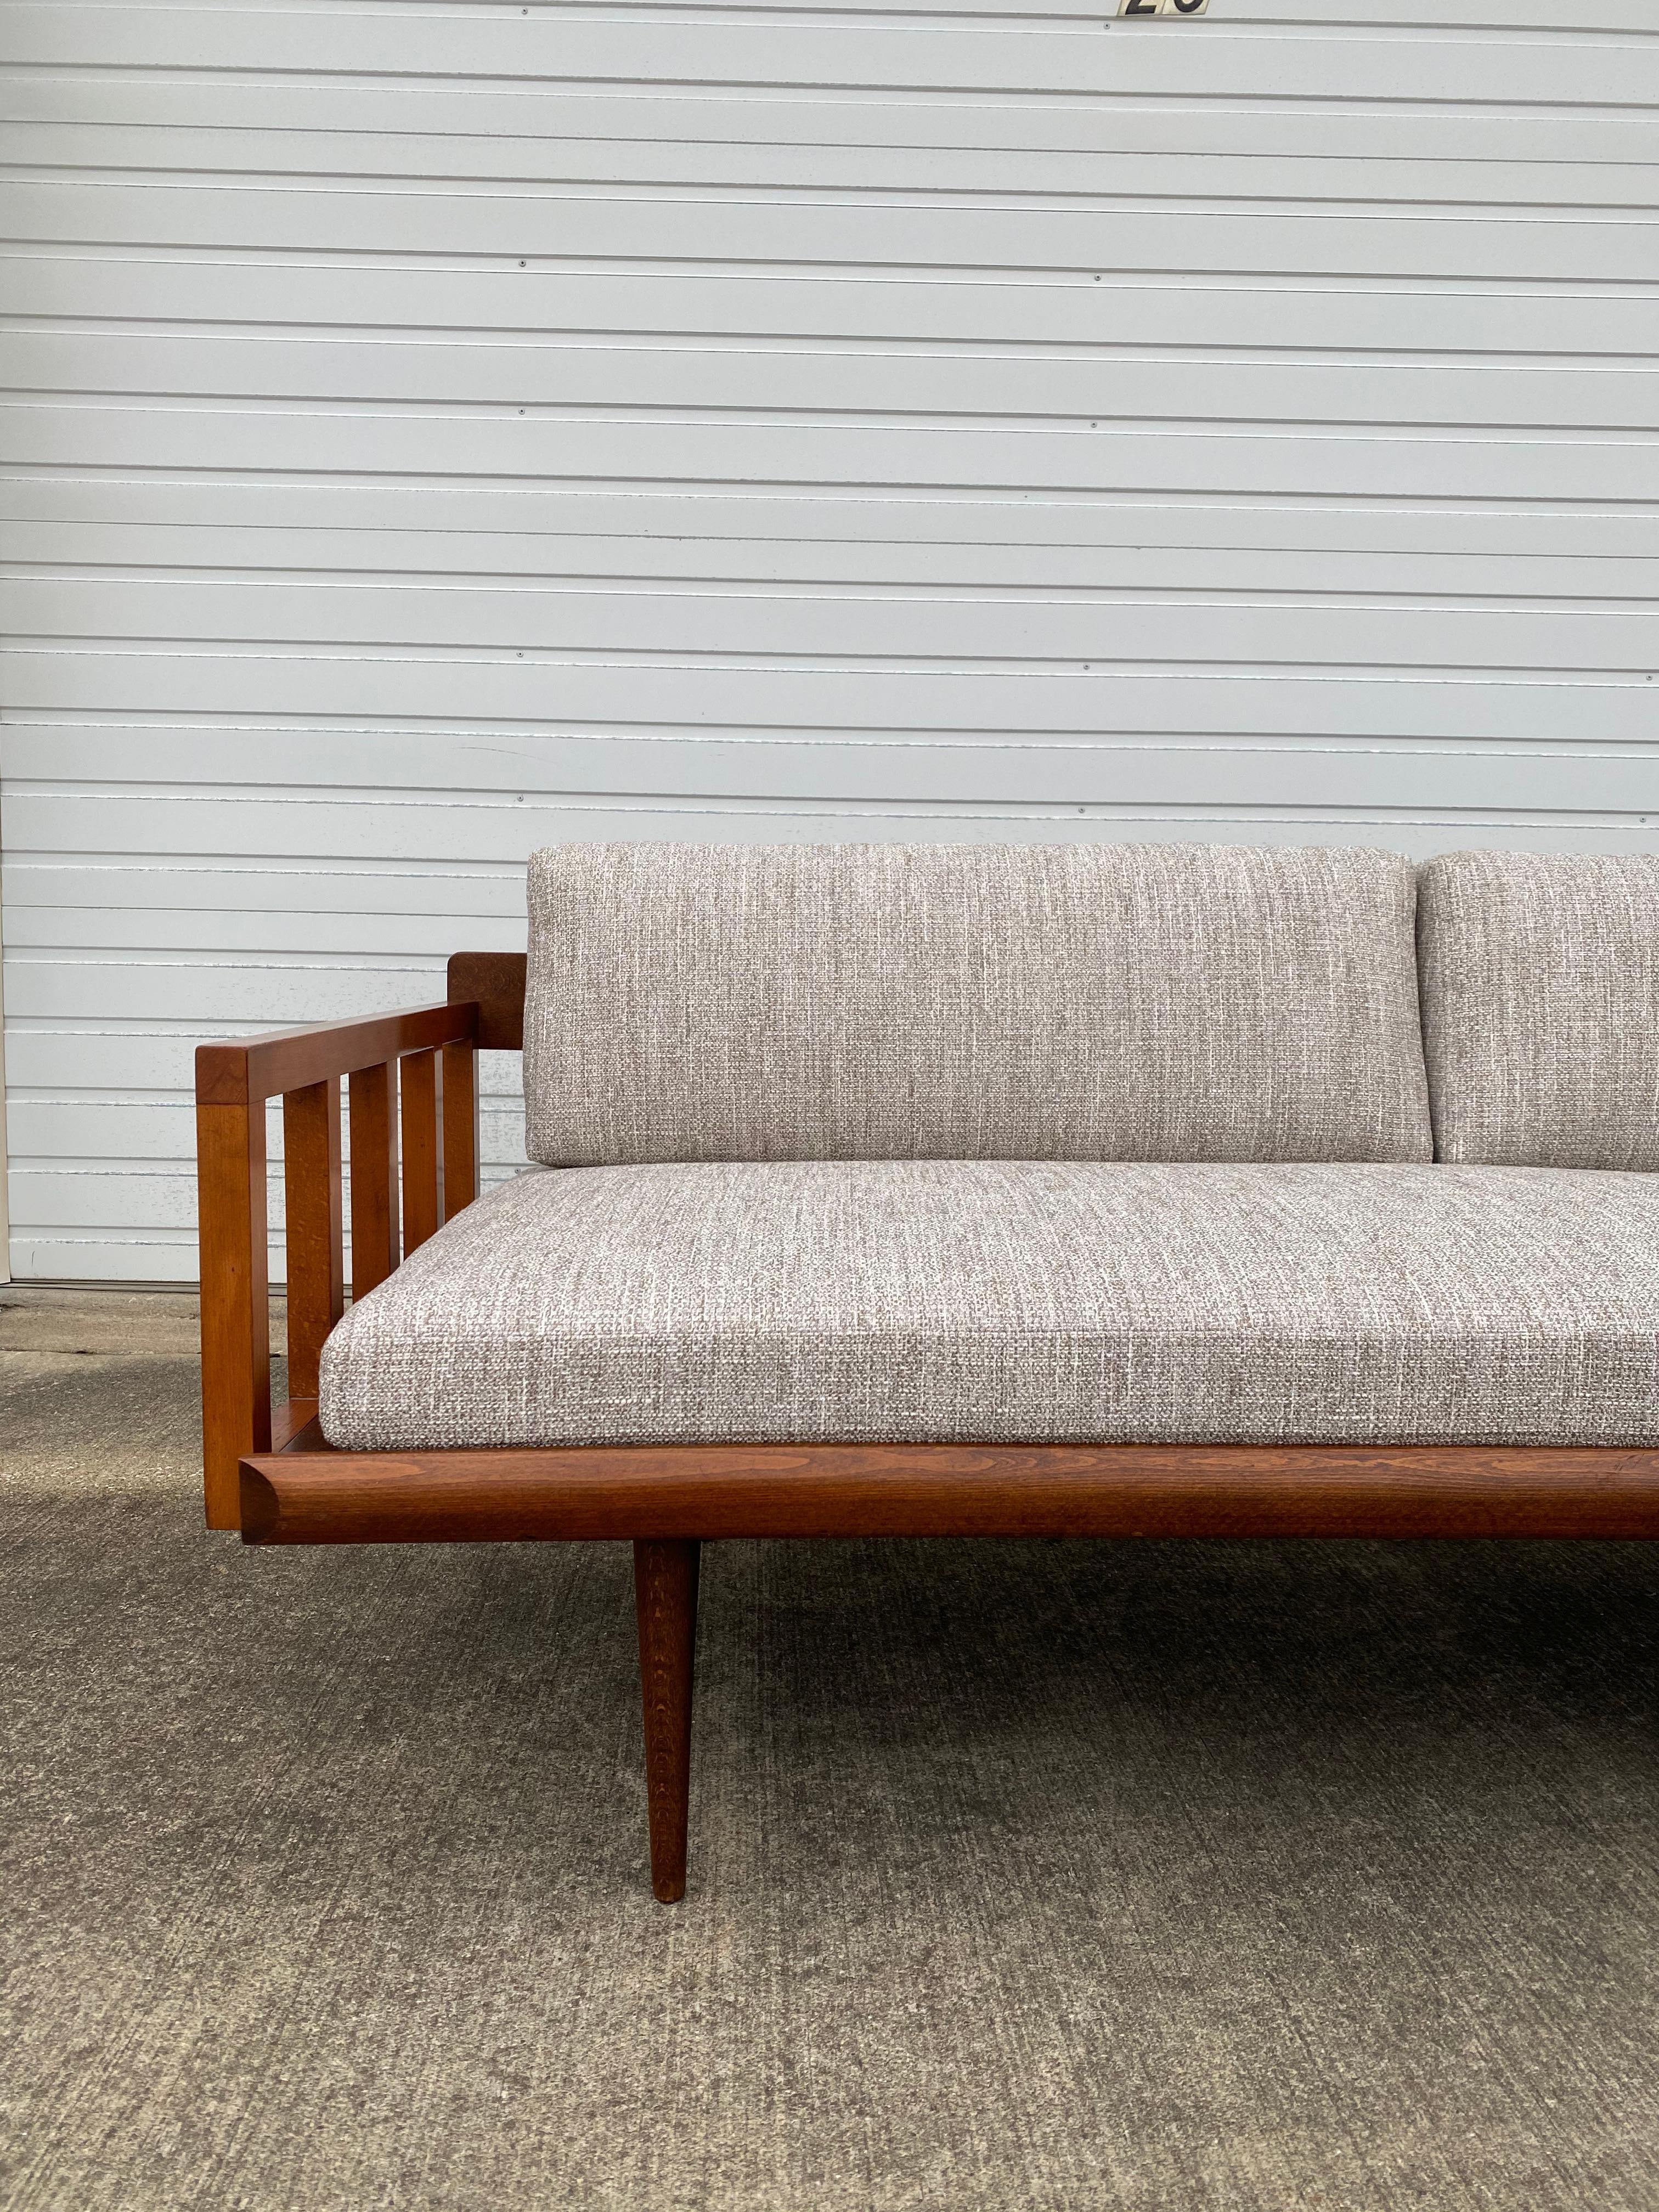 Reupholstered Yugoslavian Mid-century Modern Teak Daybed In Good Condition For Sale In Medina, OH